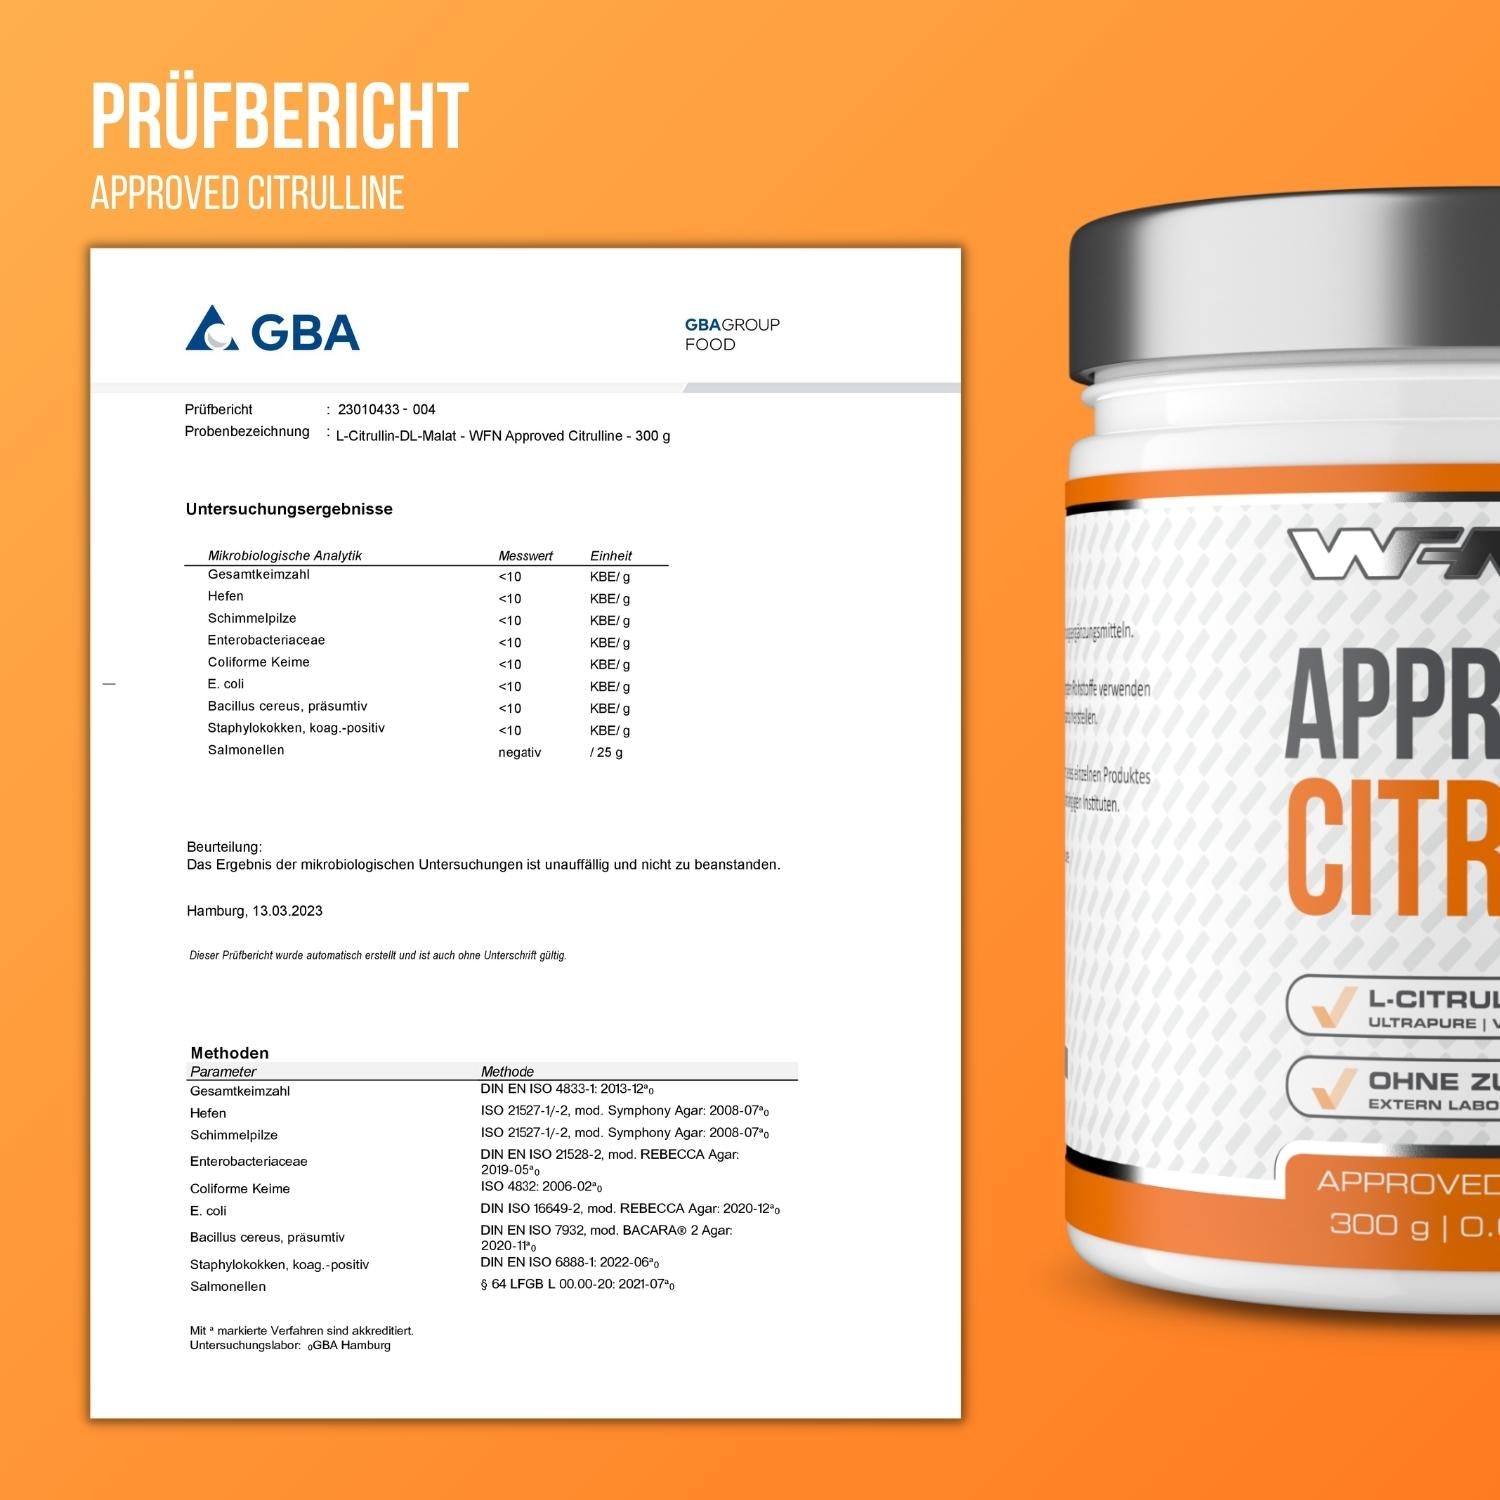 Approved Citrulline